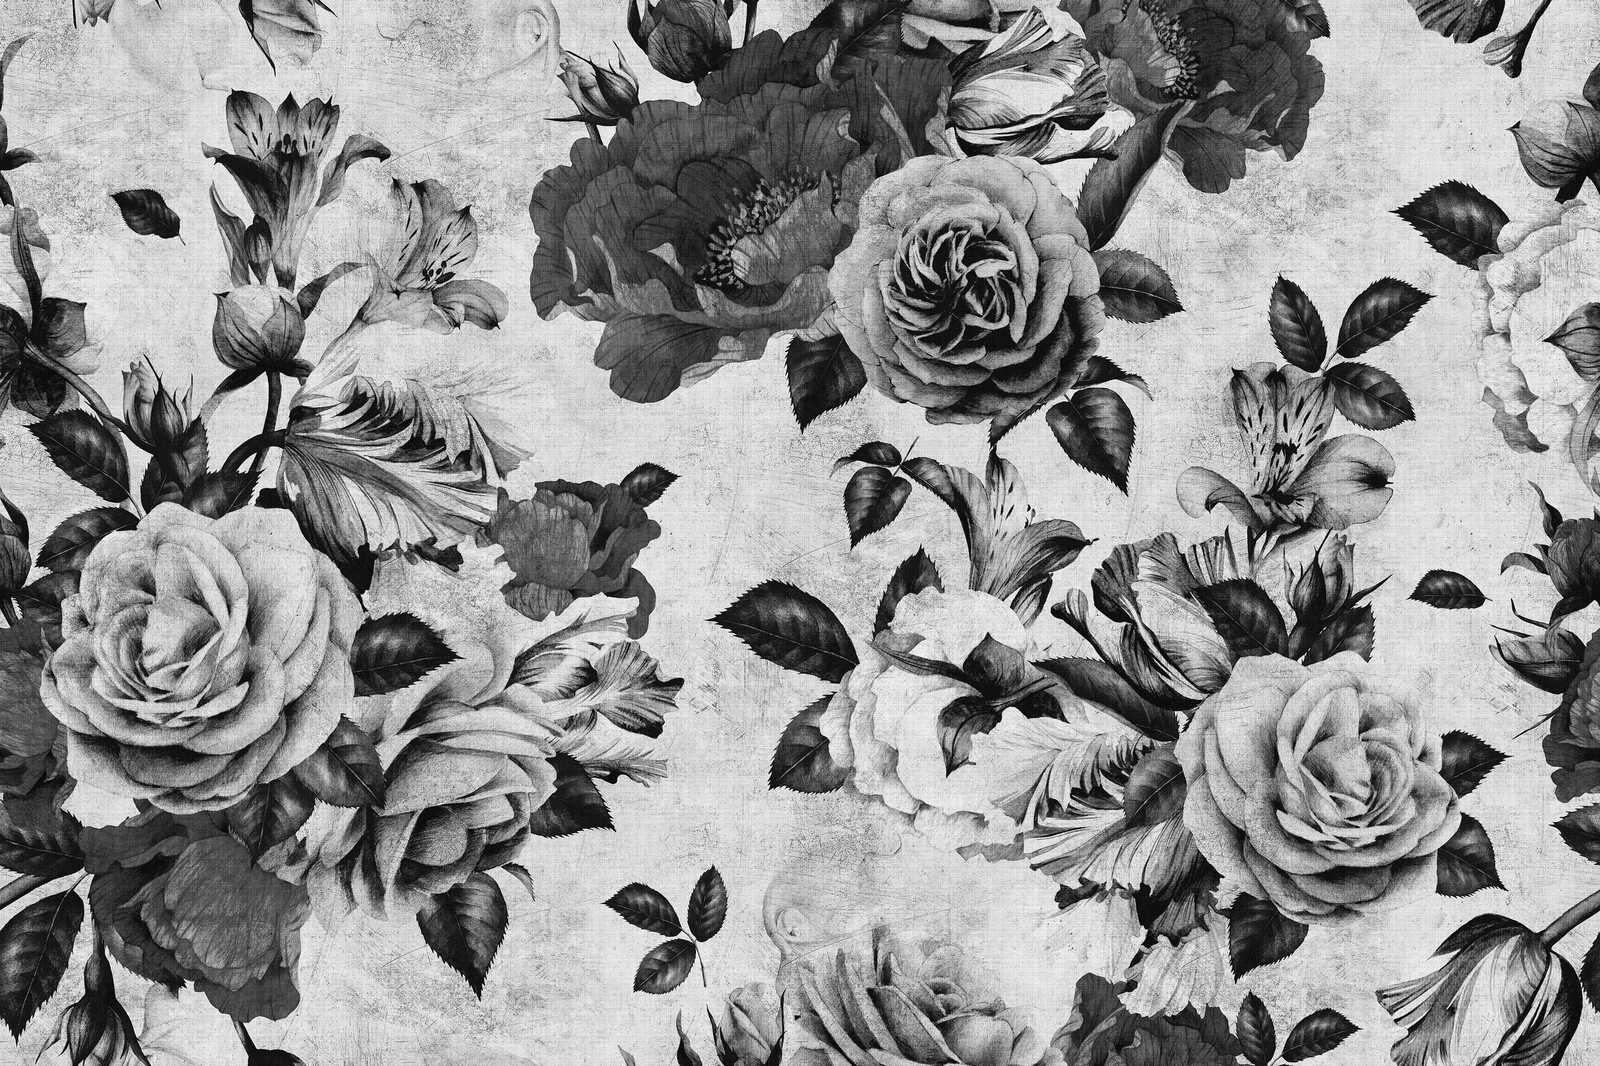             Spanish rose 1 - Roses canvas painting with black and white flowers - 0,90 m x 0,60 m
        